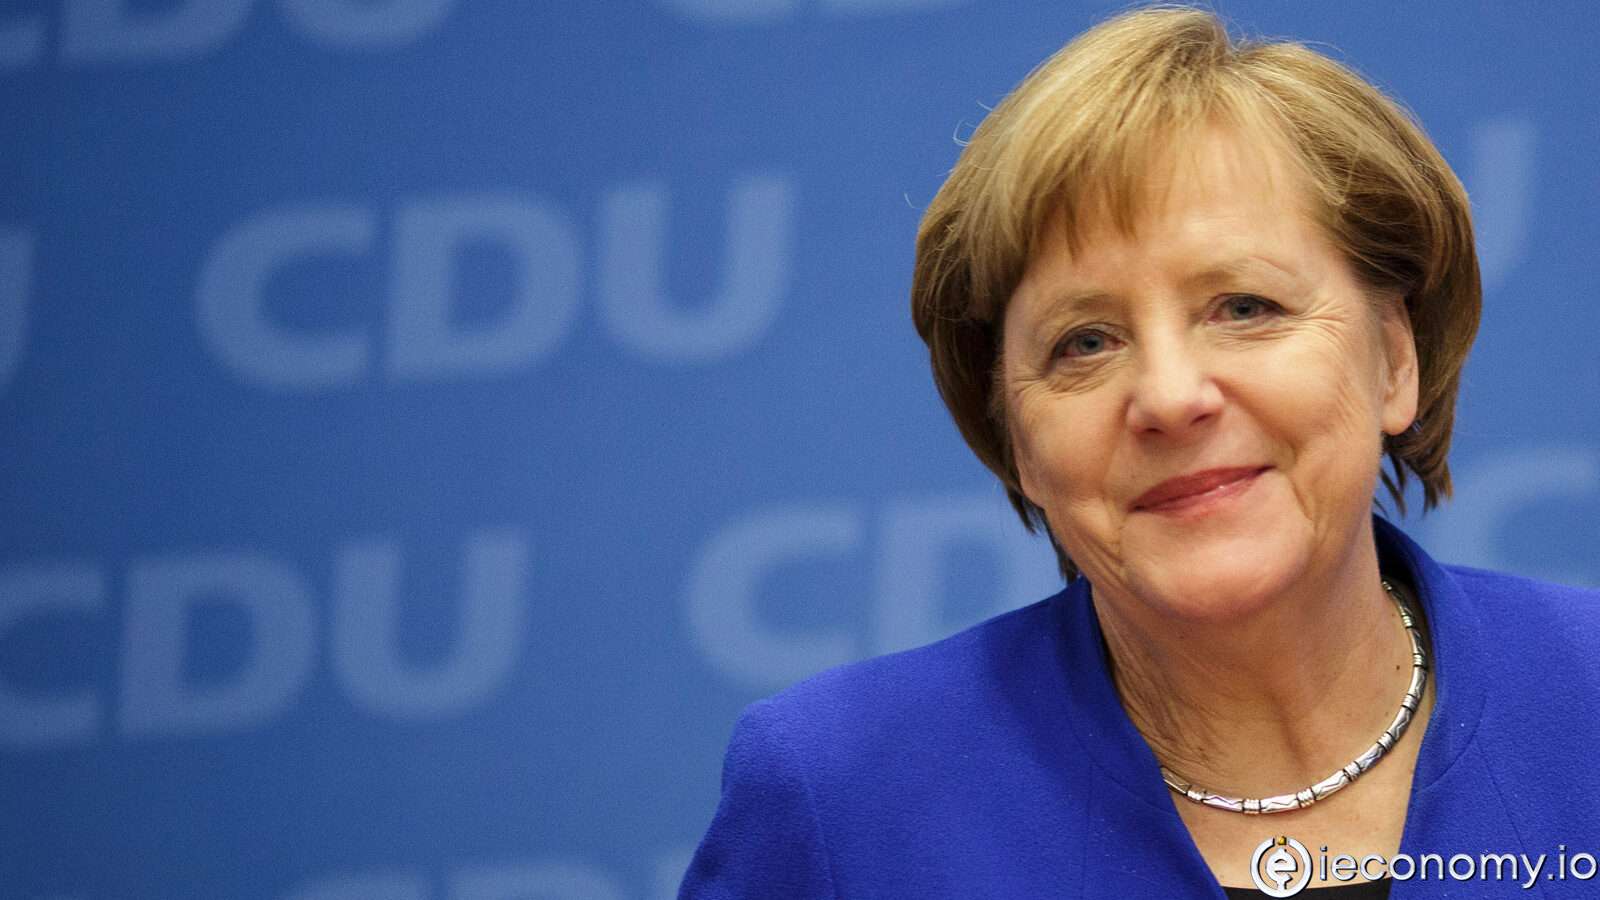 Angela Merkel has a positive picture of the economic situation in Germany